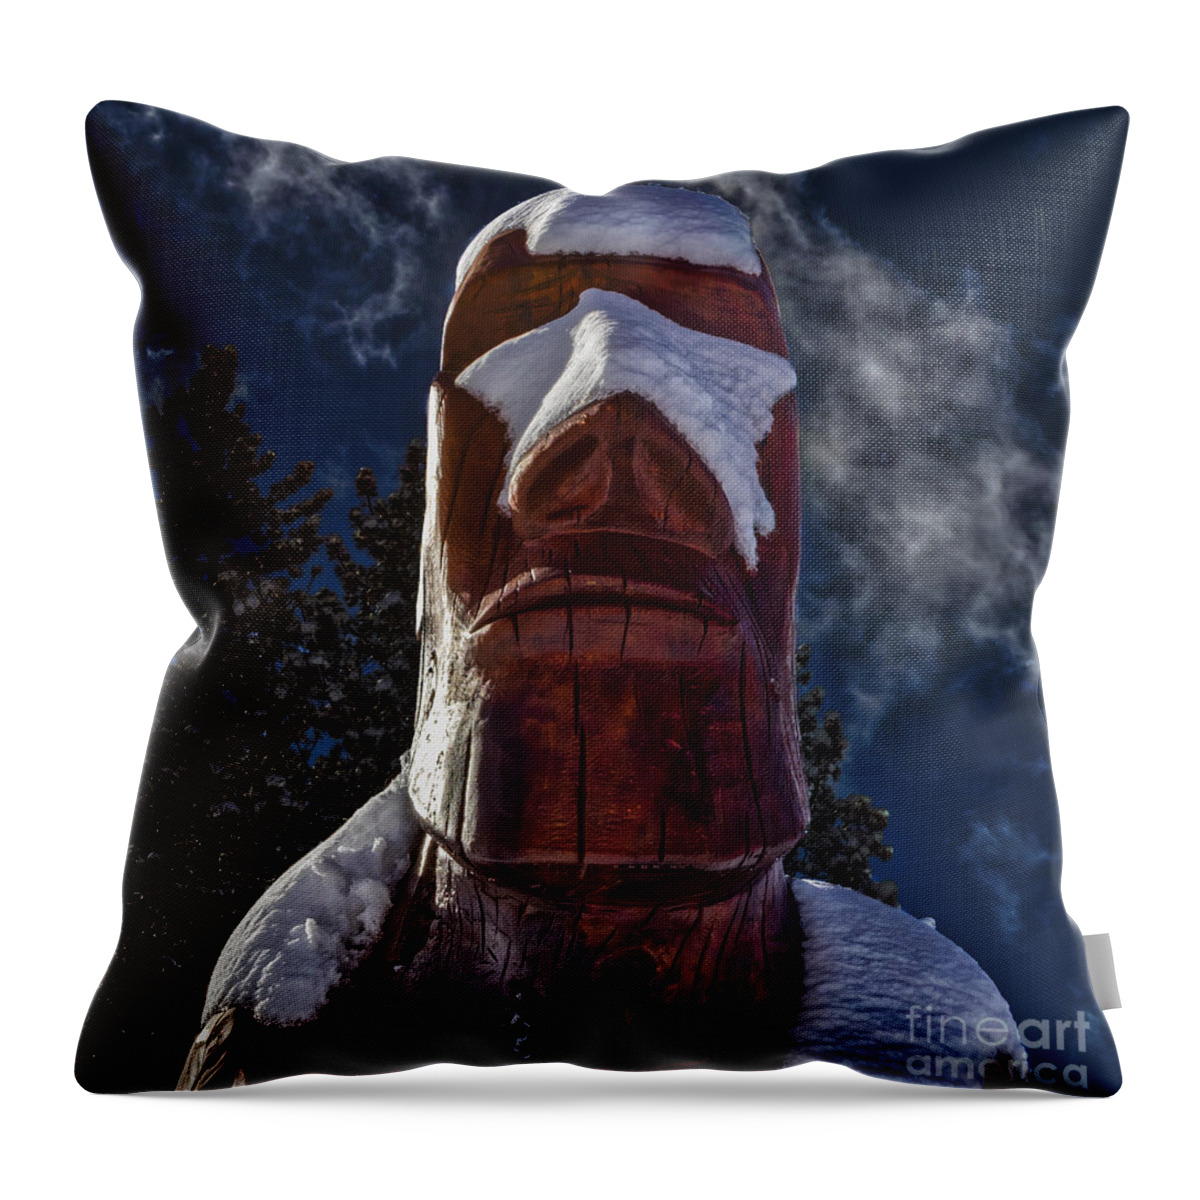 Global Warming Throw Pillow featuring the photograph Global Warming by Mitch Shindelbower